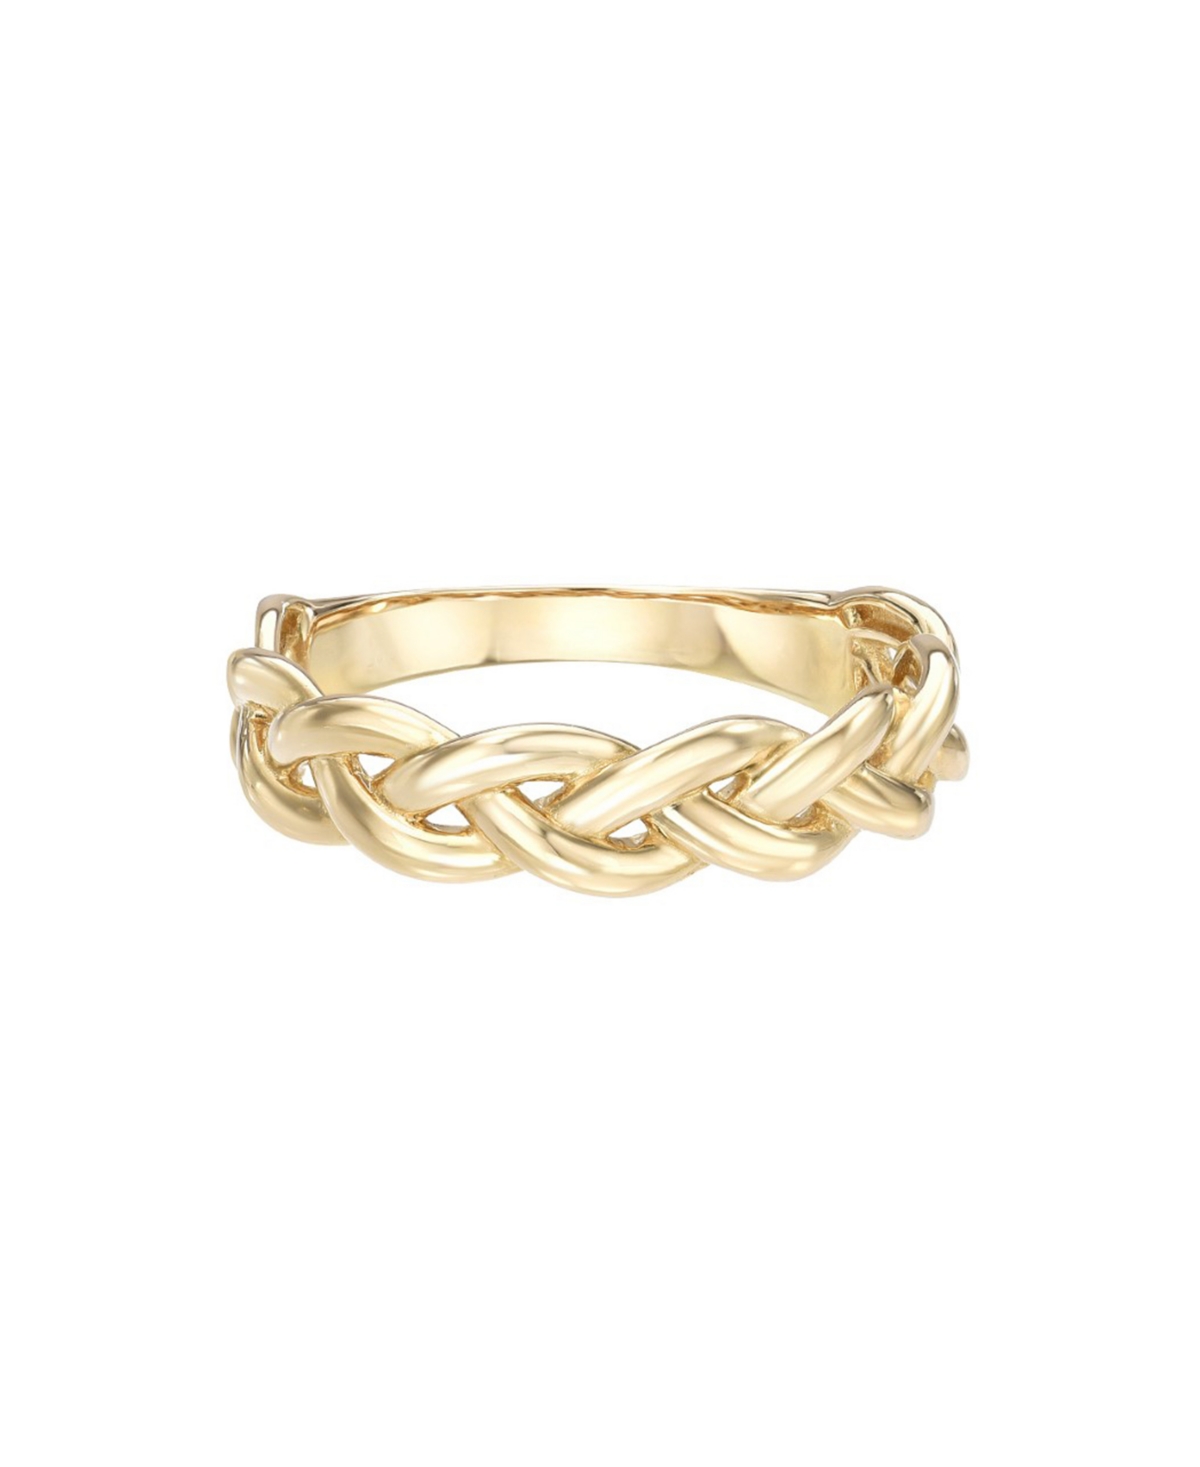 Gold Woven Band Ring - Gold